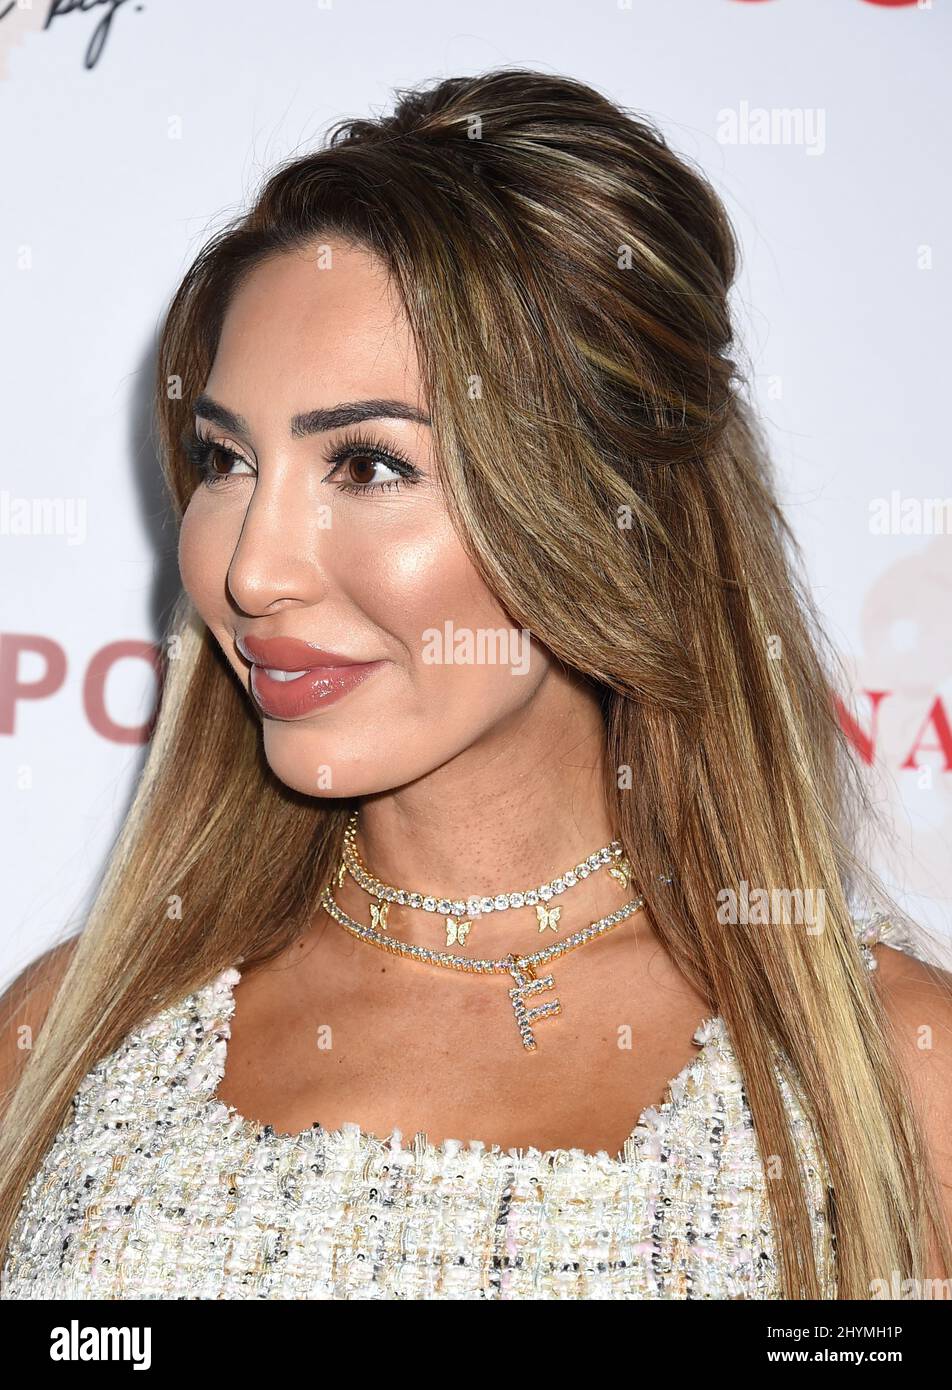 Farrah Abraham at Nazarian Institute's ThinkBIG 2020 Conference held at the 1 Hotel West Hollywood on January 11, 2020 in West Hollywoodd, CA. Stock Photo